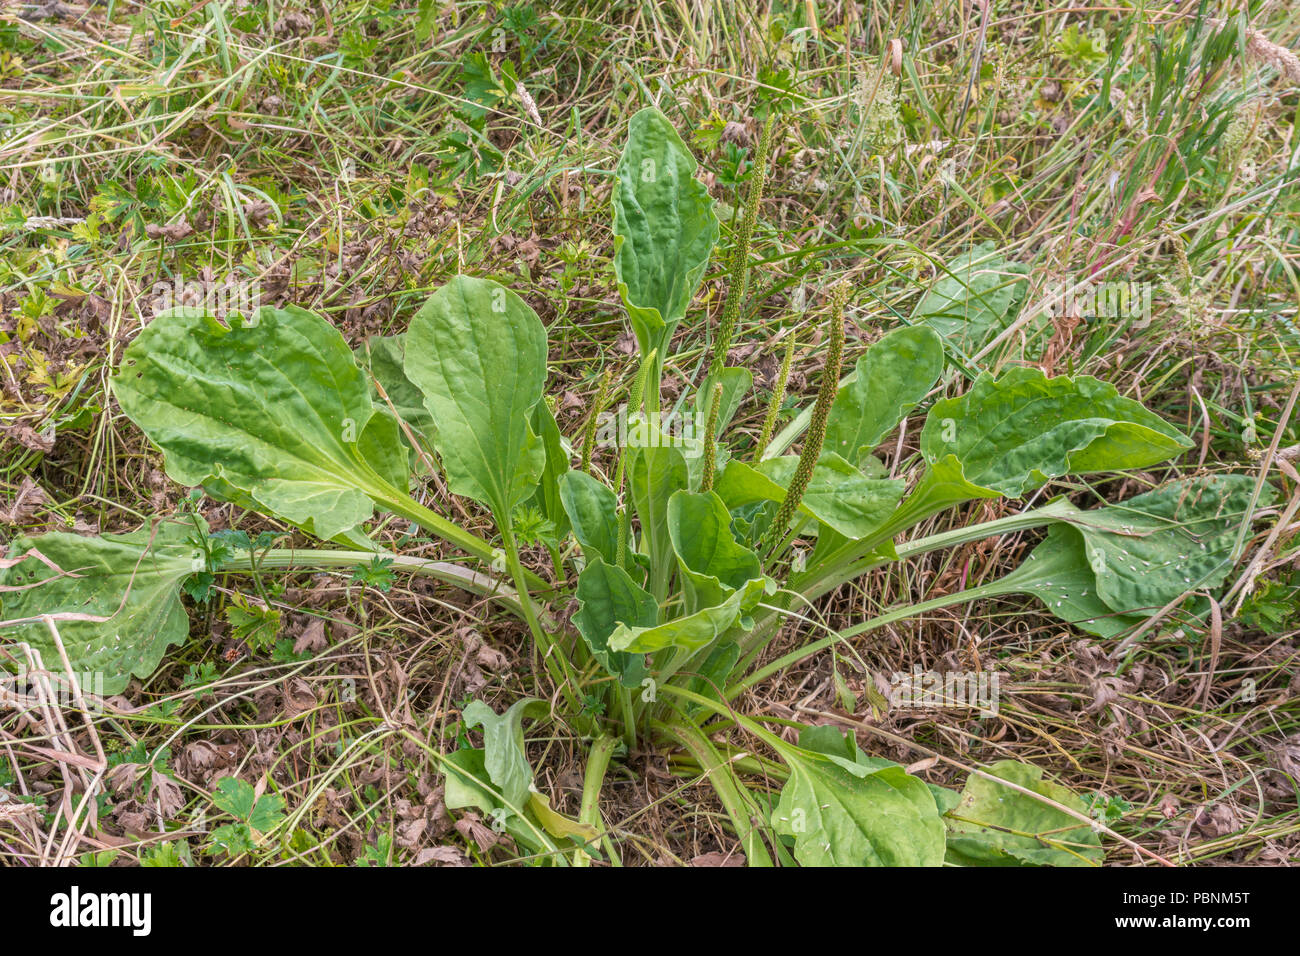 Foliage / leaves of a mature Greater Plantain / Plantago major. Stock Photo